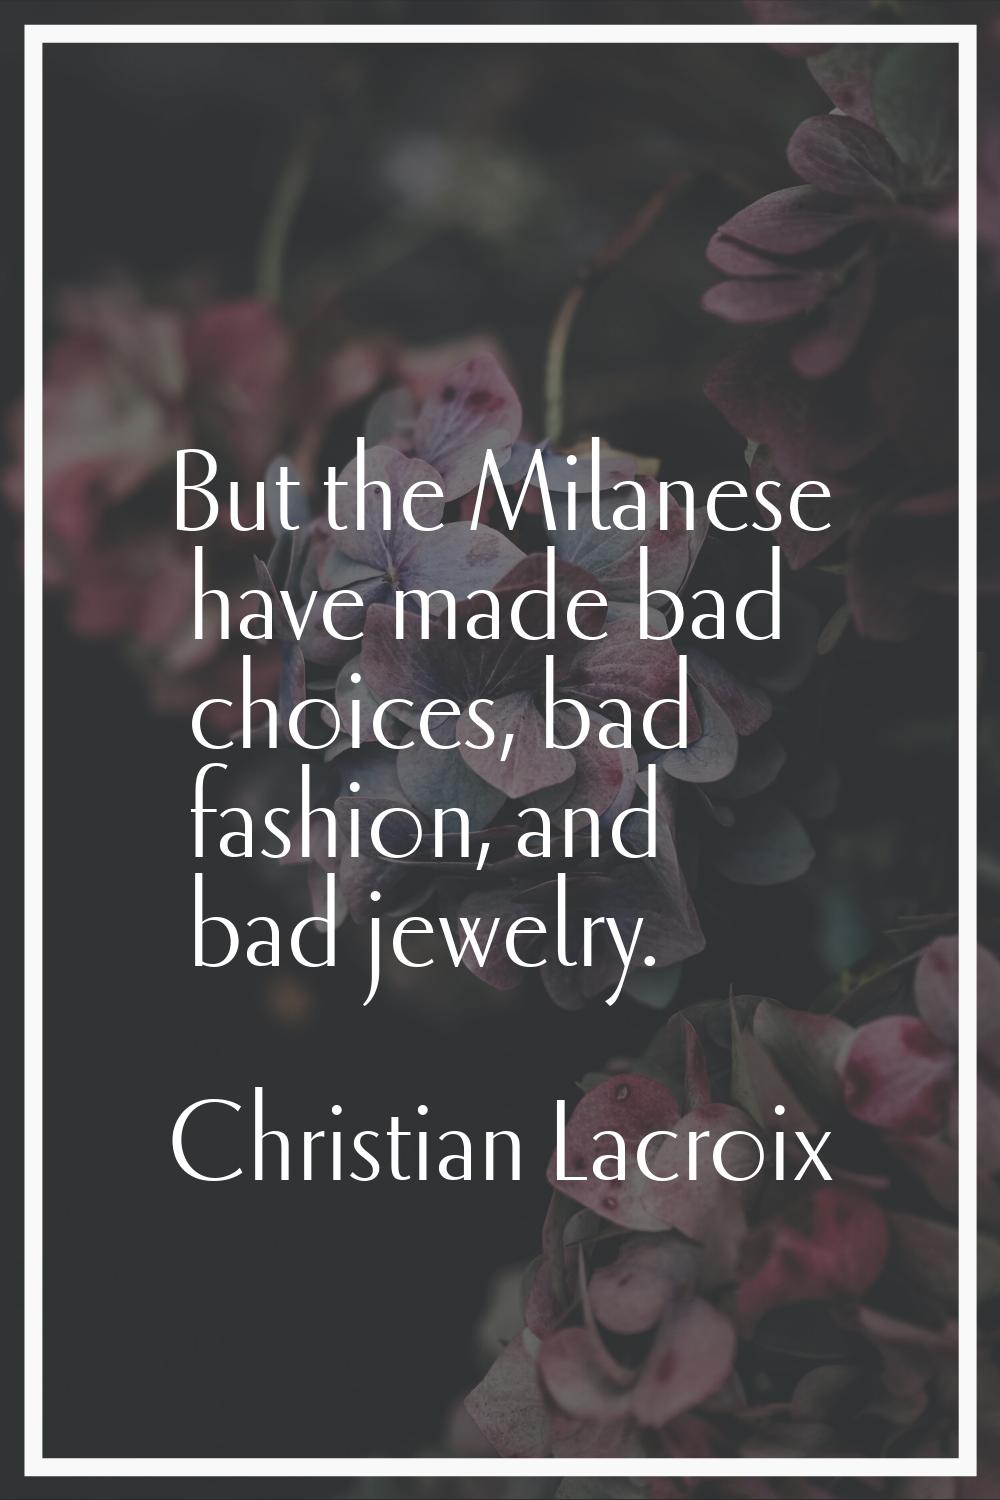 But the Milanese have made bad choices, bad fashion, and bad jewelry.